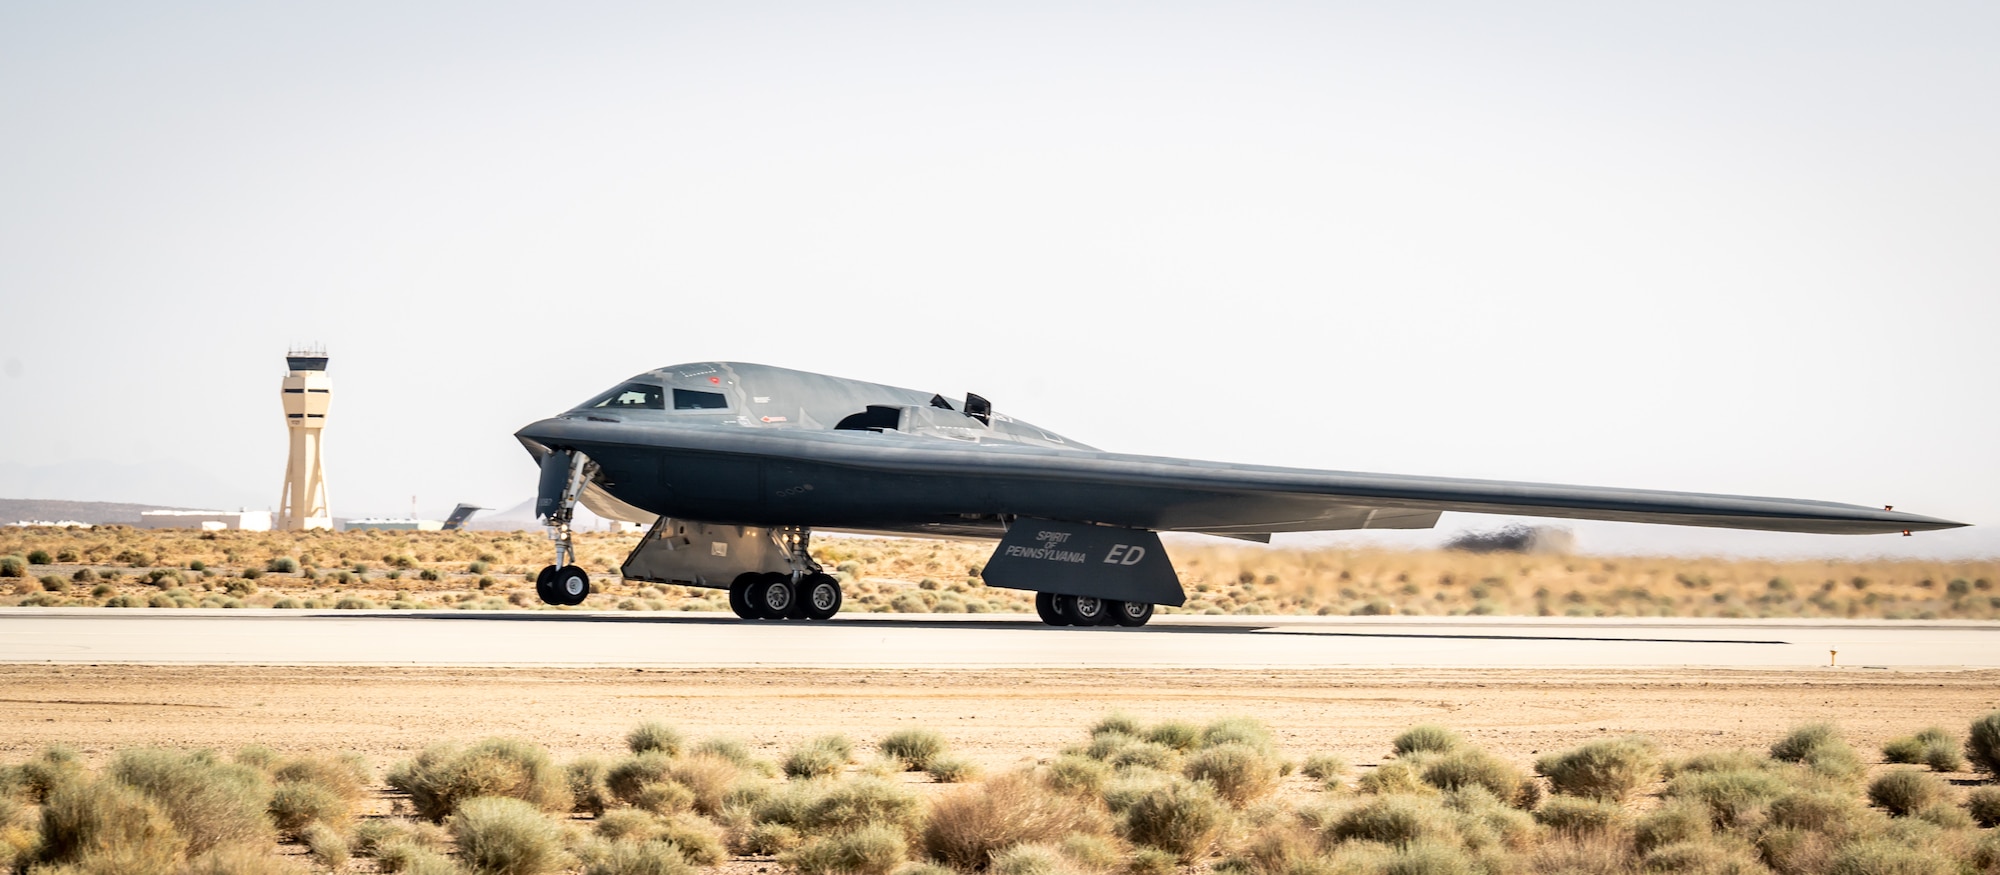 The B-2 Spirit of Pennsylvania takes off from Edwards Air Force Base, California, enroute to Whiteman Air Force Base, Missouri, June 14, for maintenance. (Air Force photo by Giancarlo Casem)